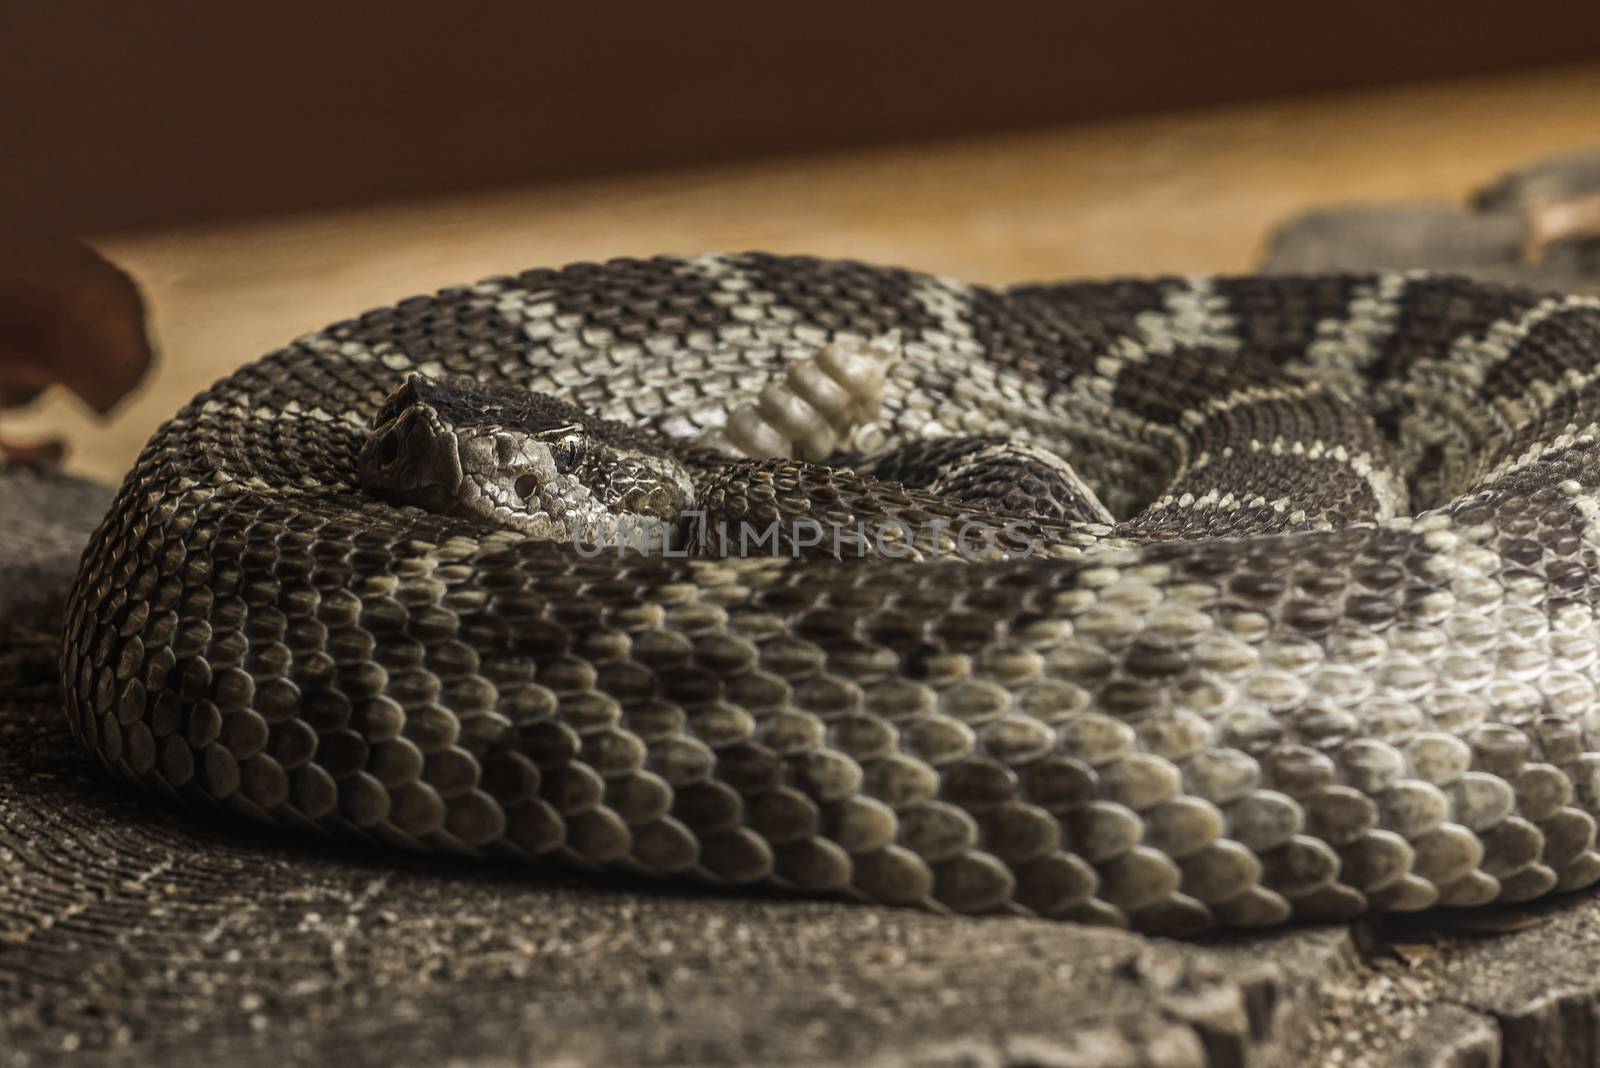 Close up of a coiling Northern Pacific Rattlesnake, or crotalus oreganus, with selective focus on the head